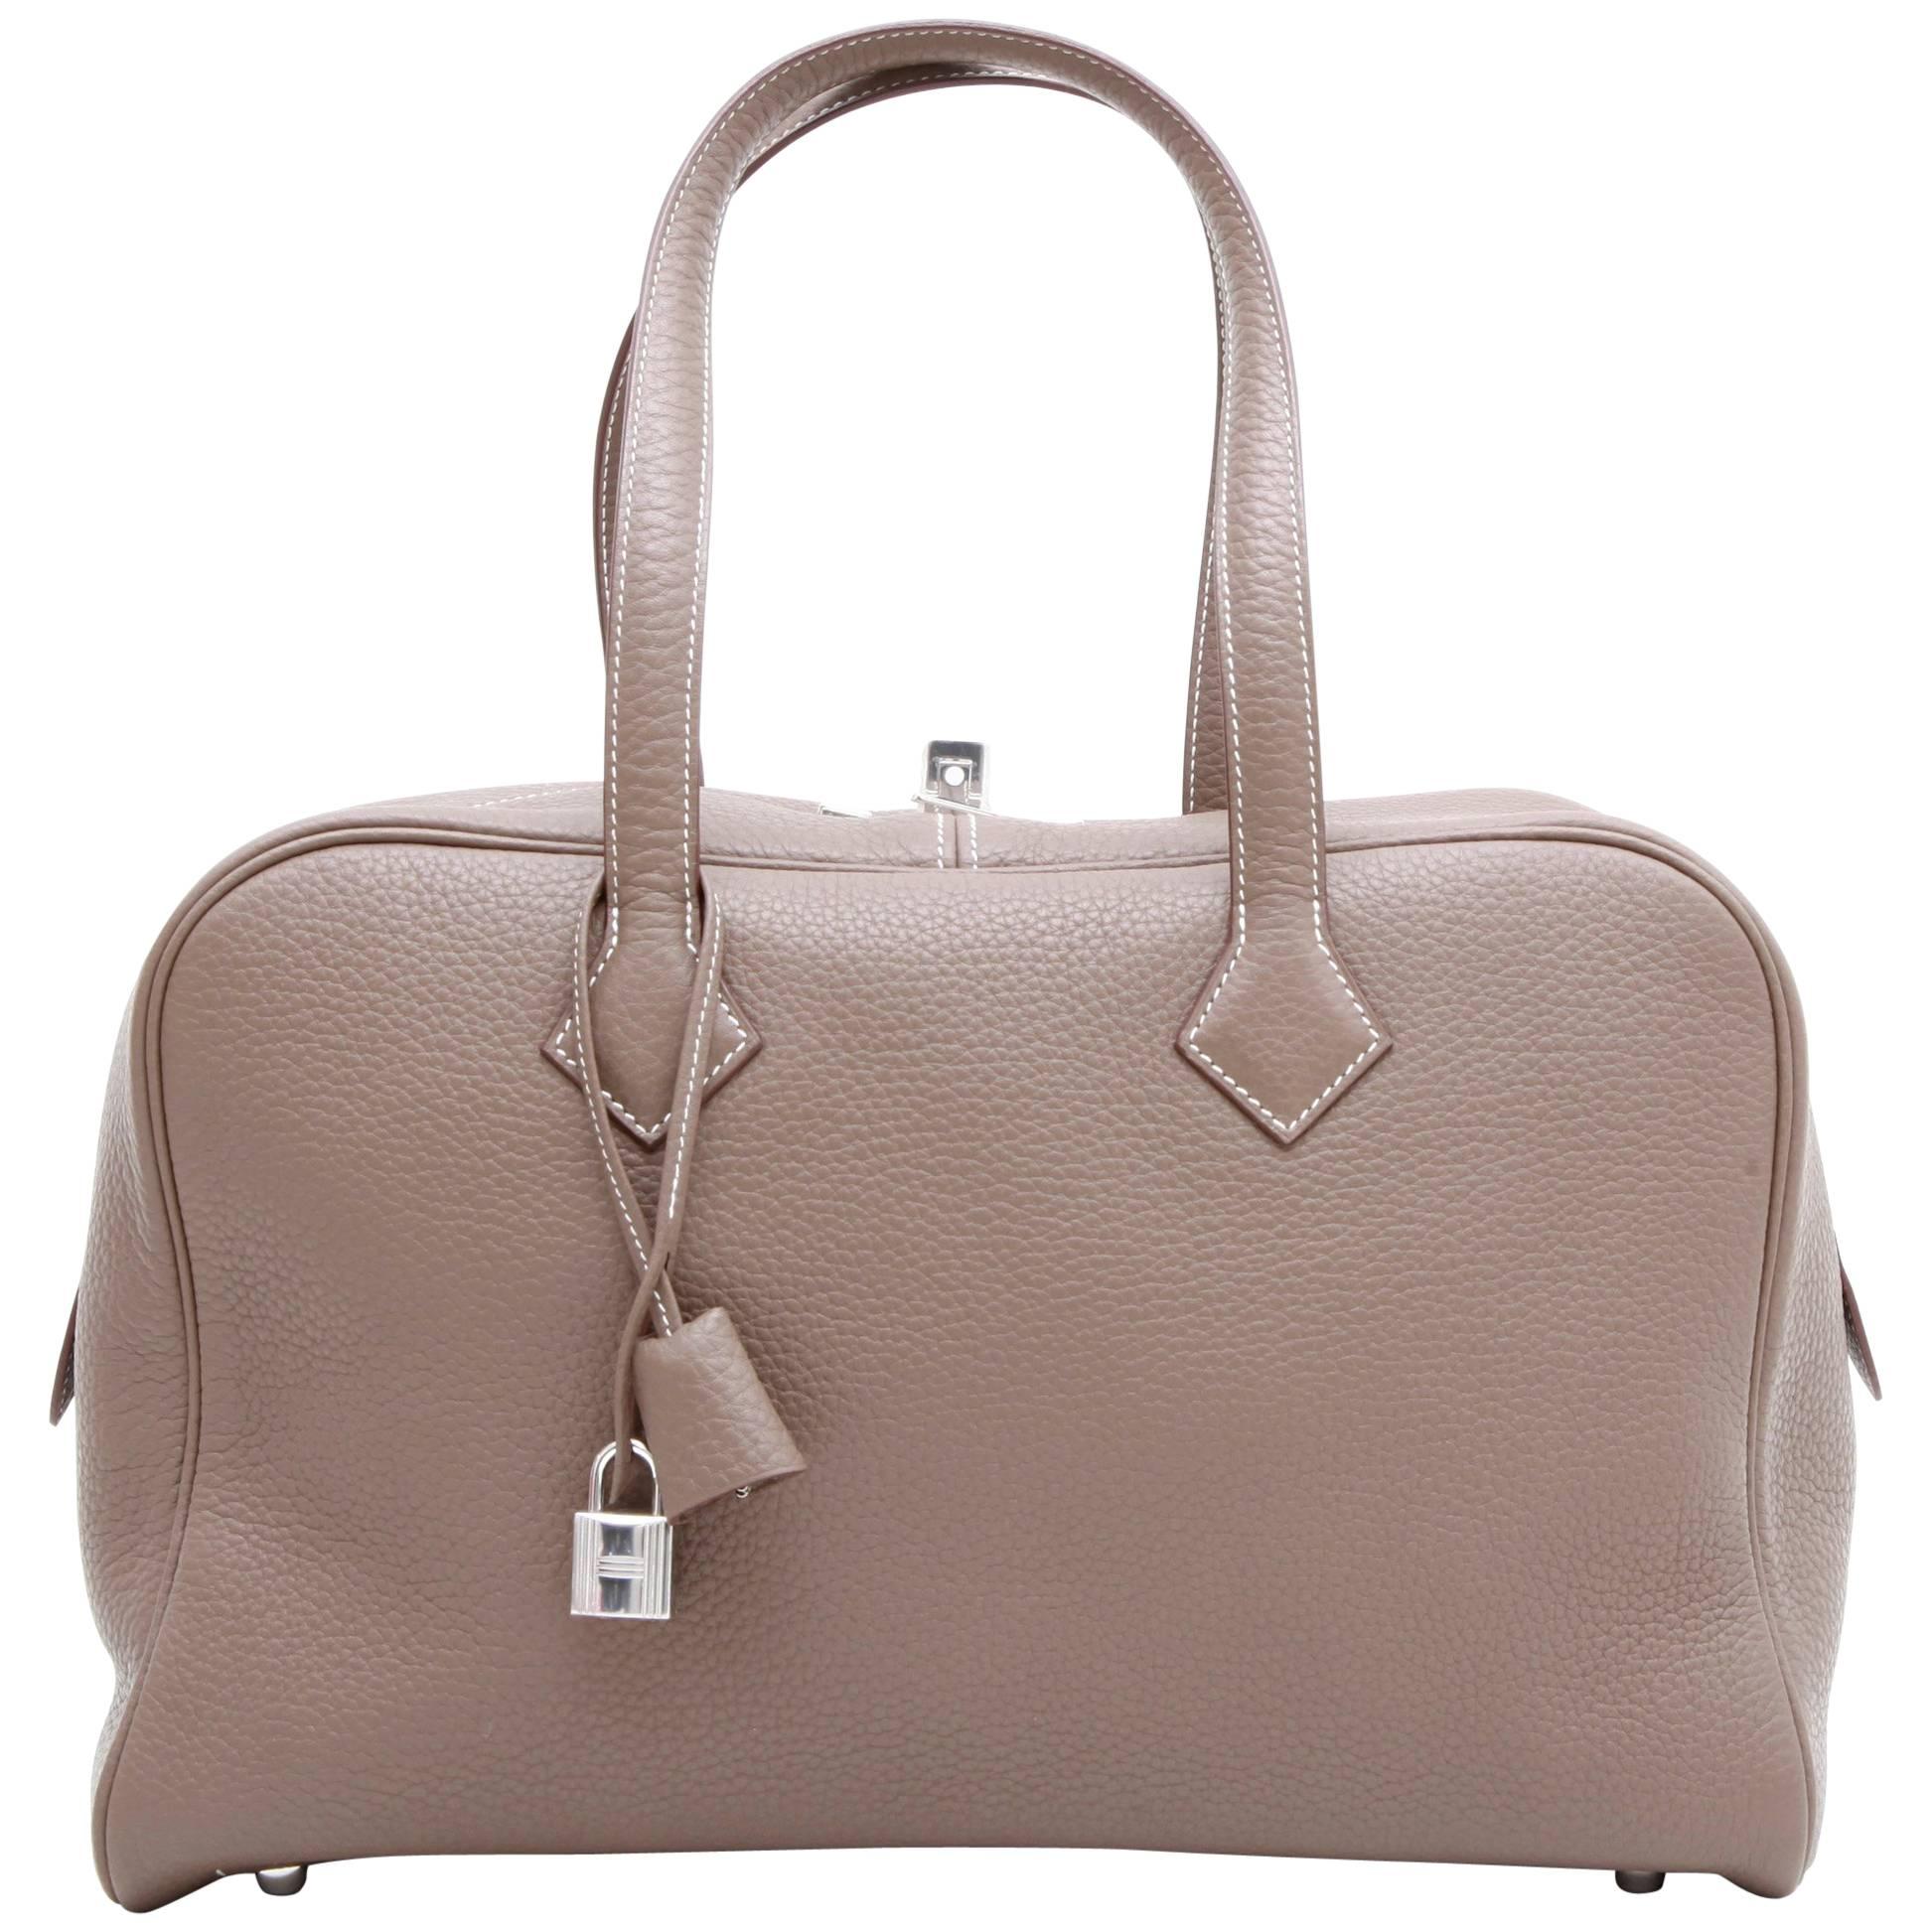 Hermes Victoria Bag in Etoupe Clémence Taurillon Leather and Saddle Stitching